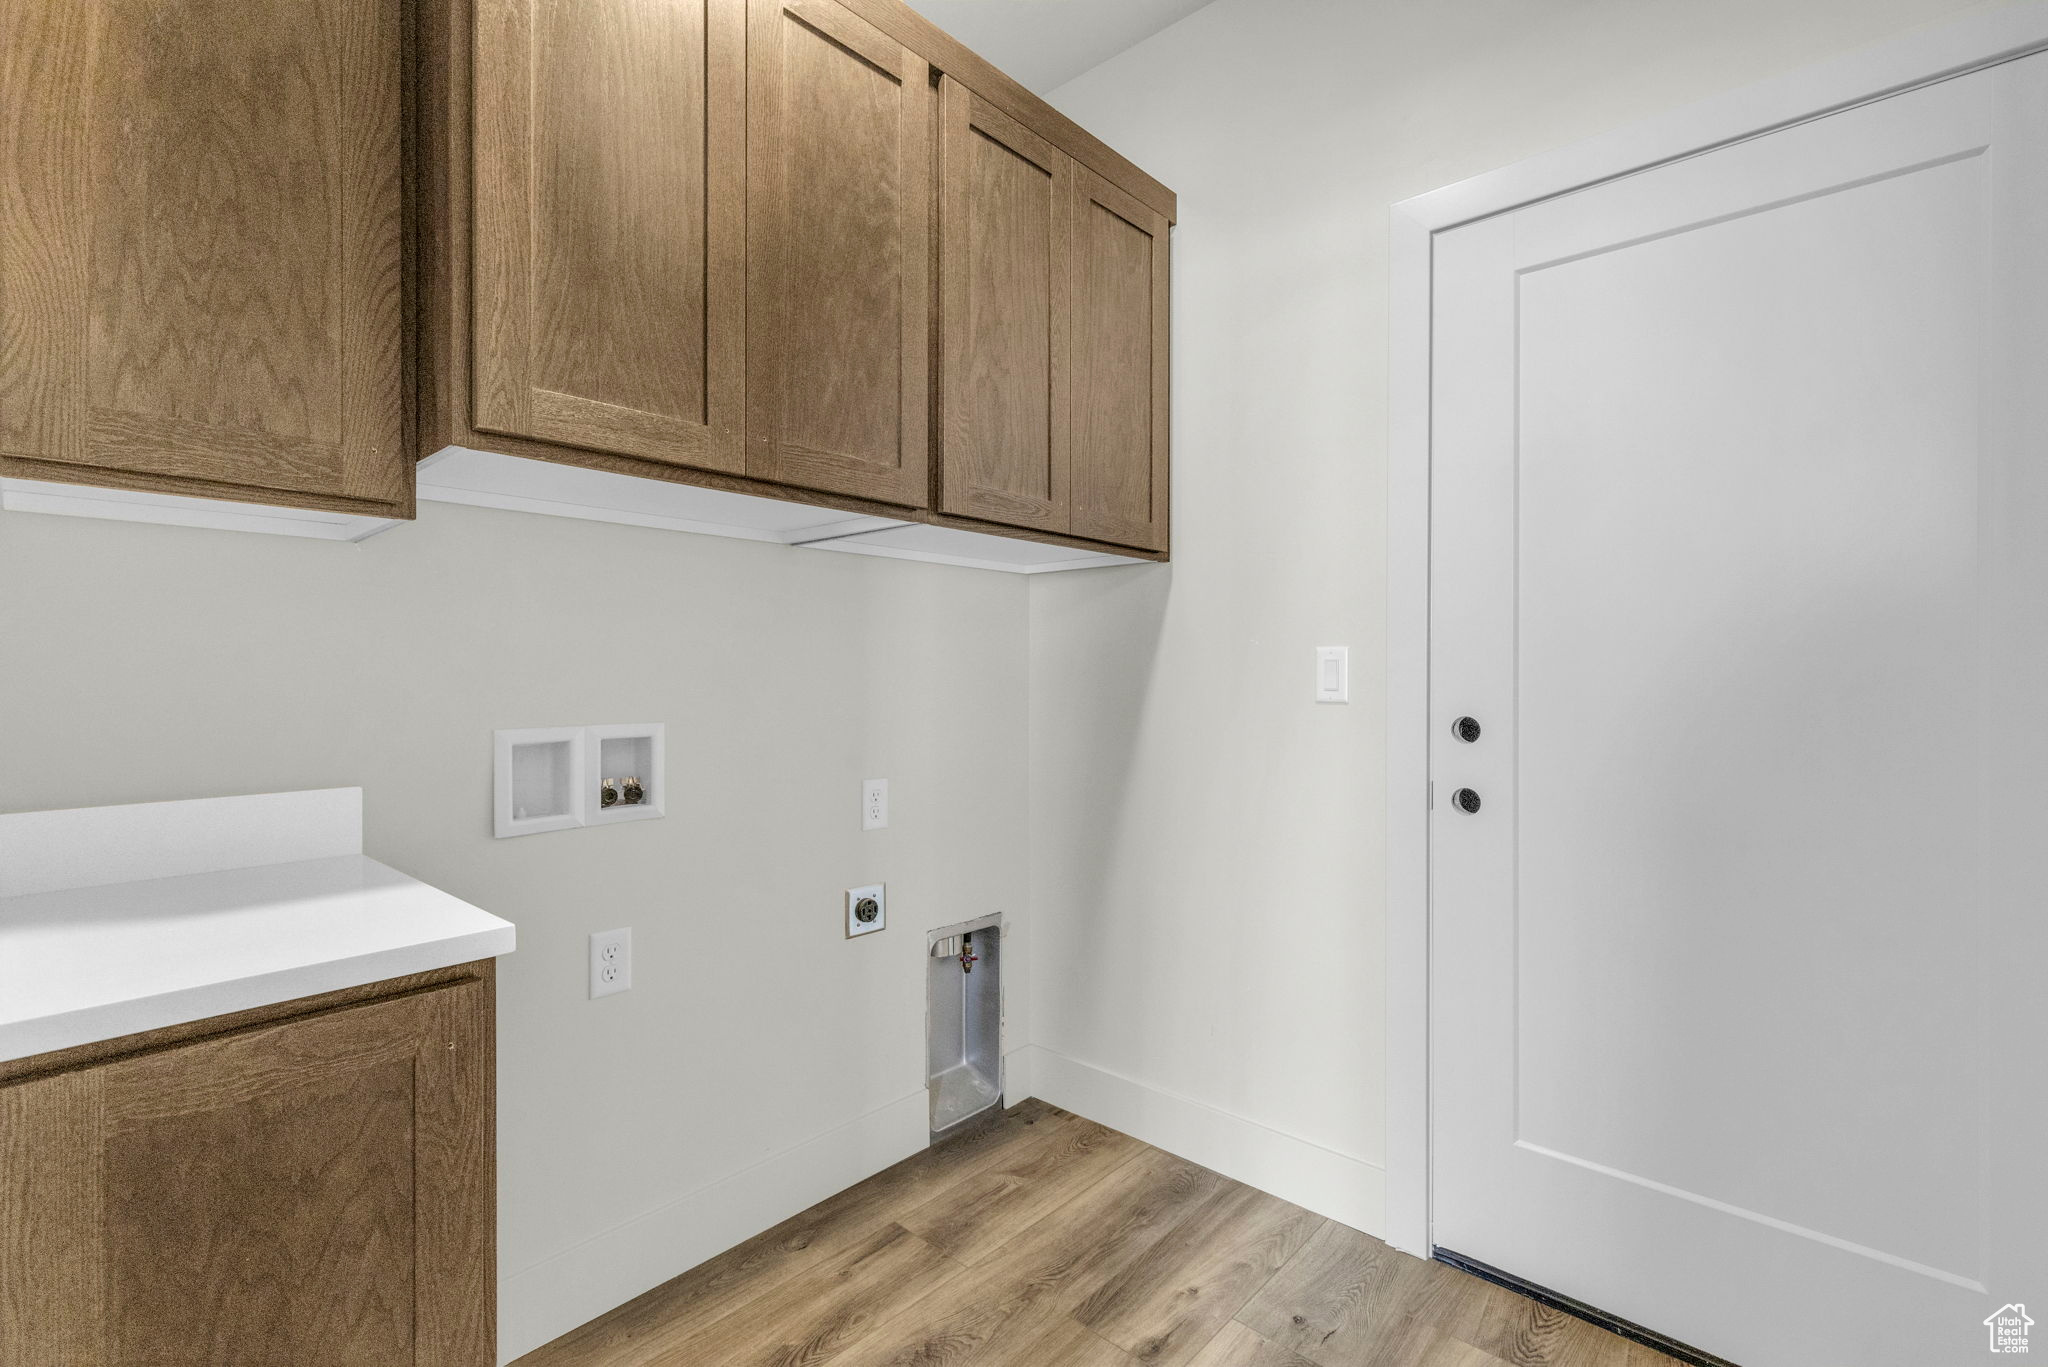 Laundry room with cabinets, hookup for a washing machine, hookup for an electric dryer, and light wood-type flooring